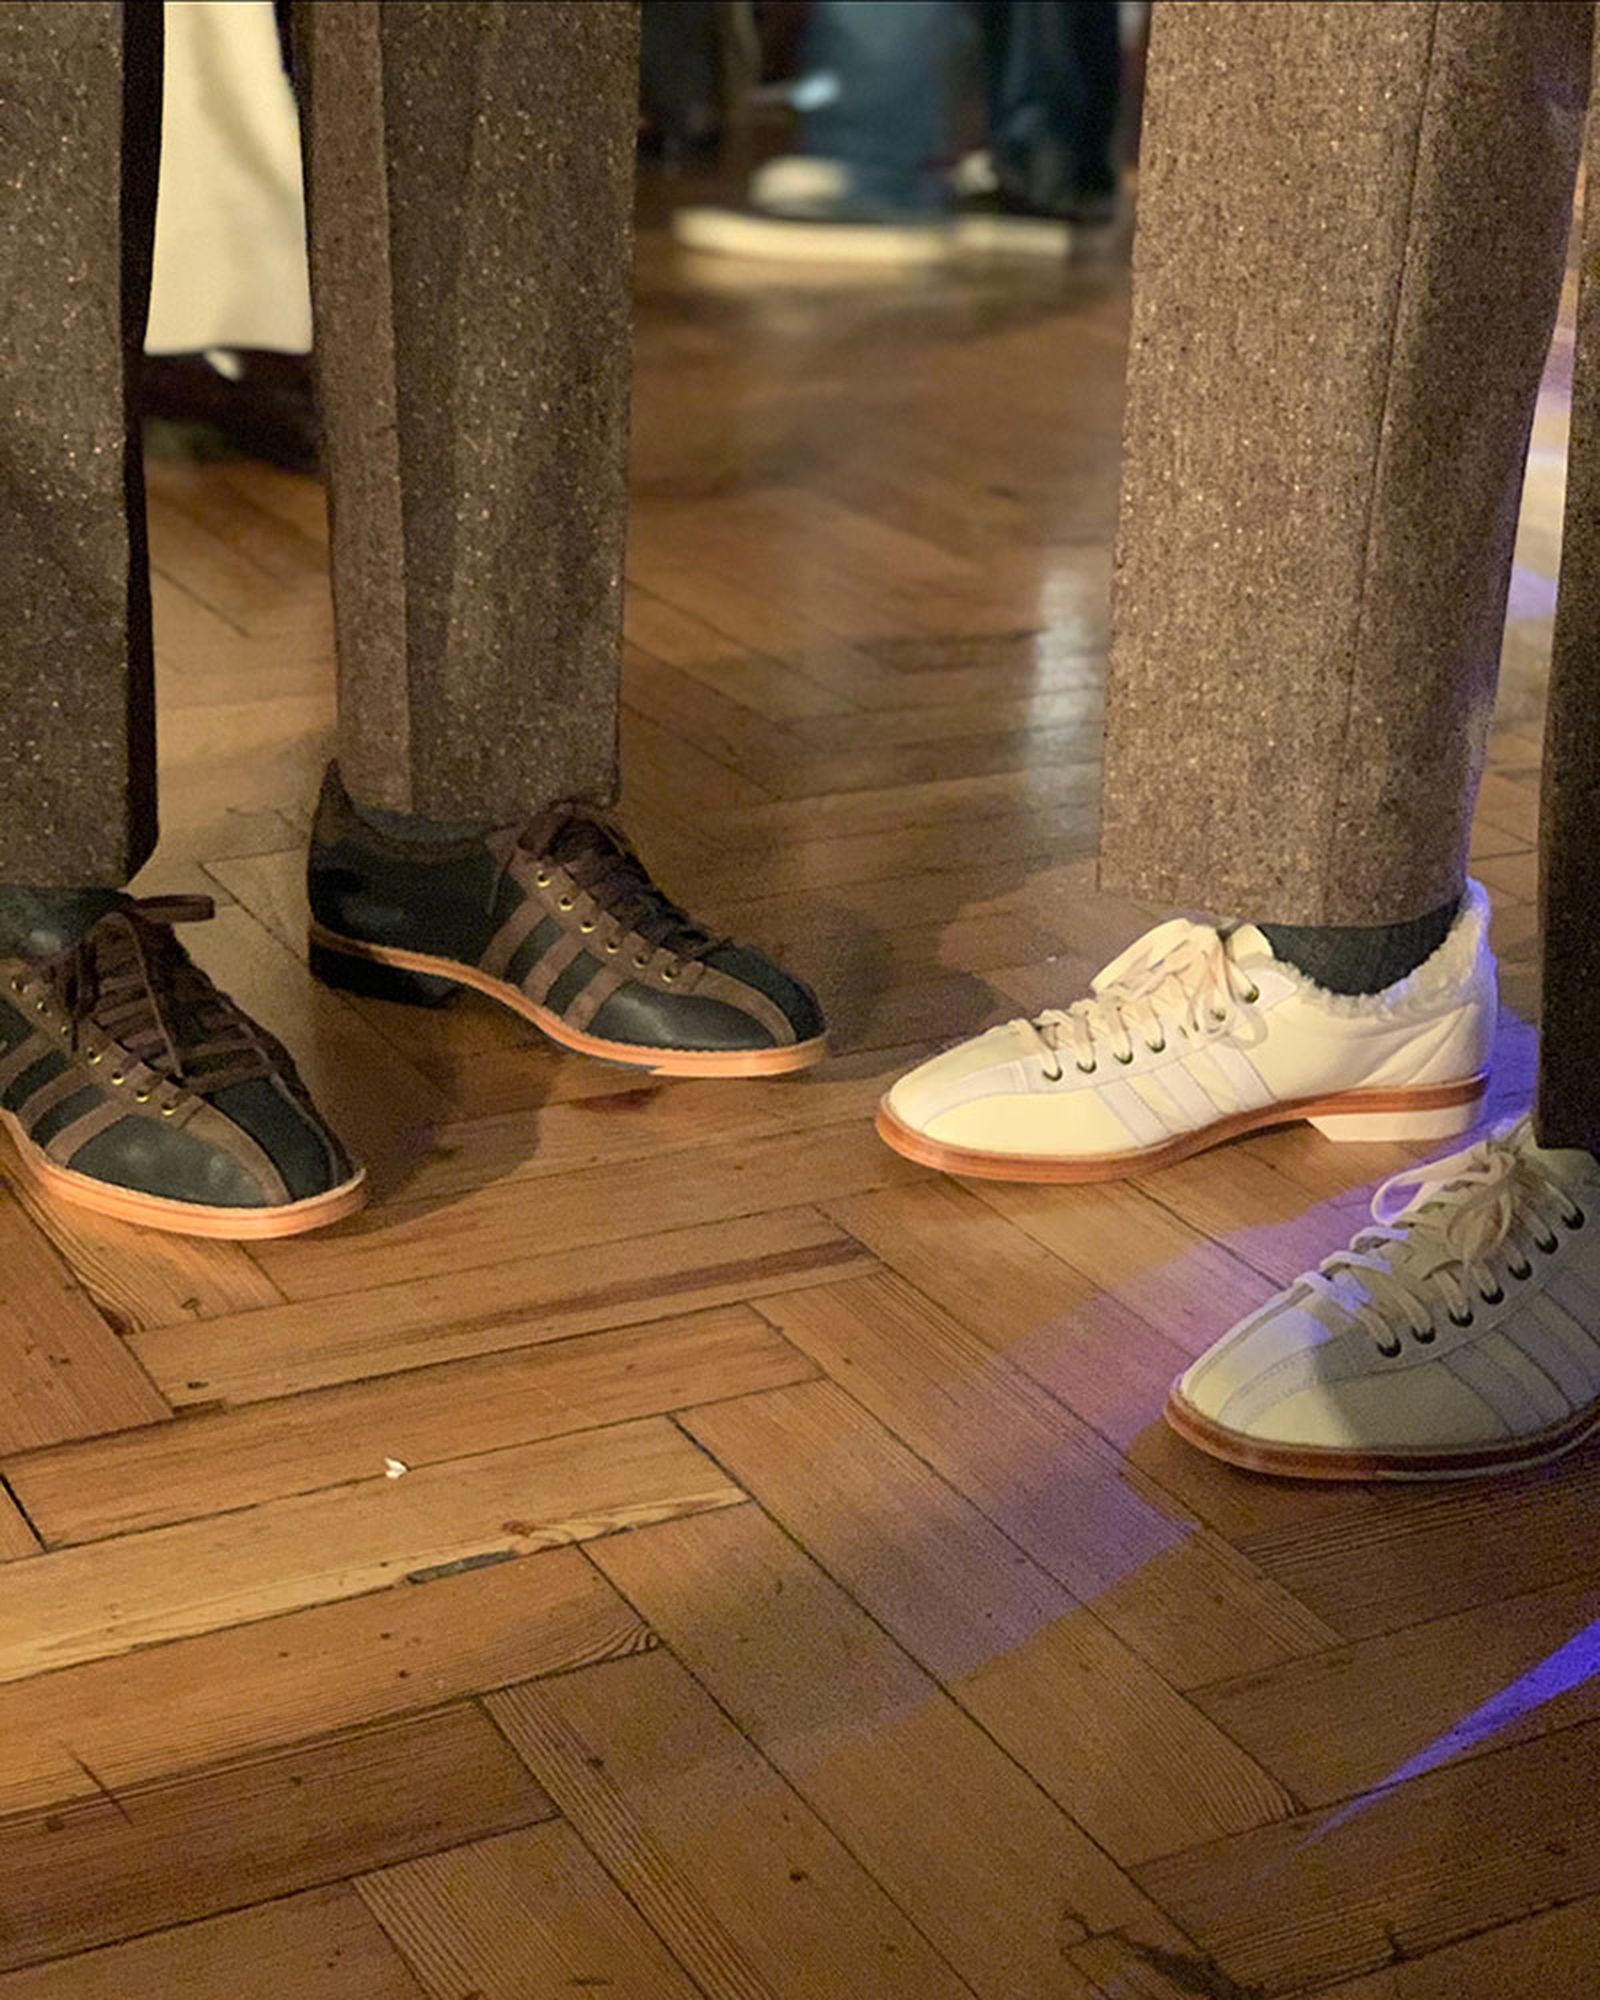 Wales Bonner x adidas FW20: Official First Look